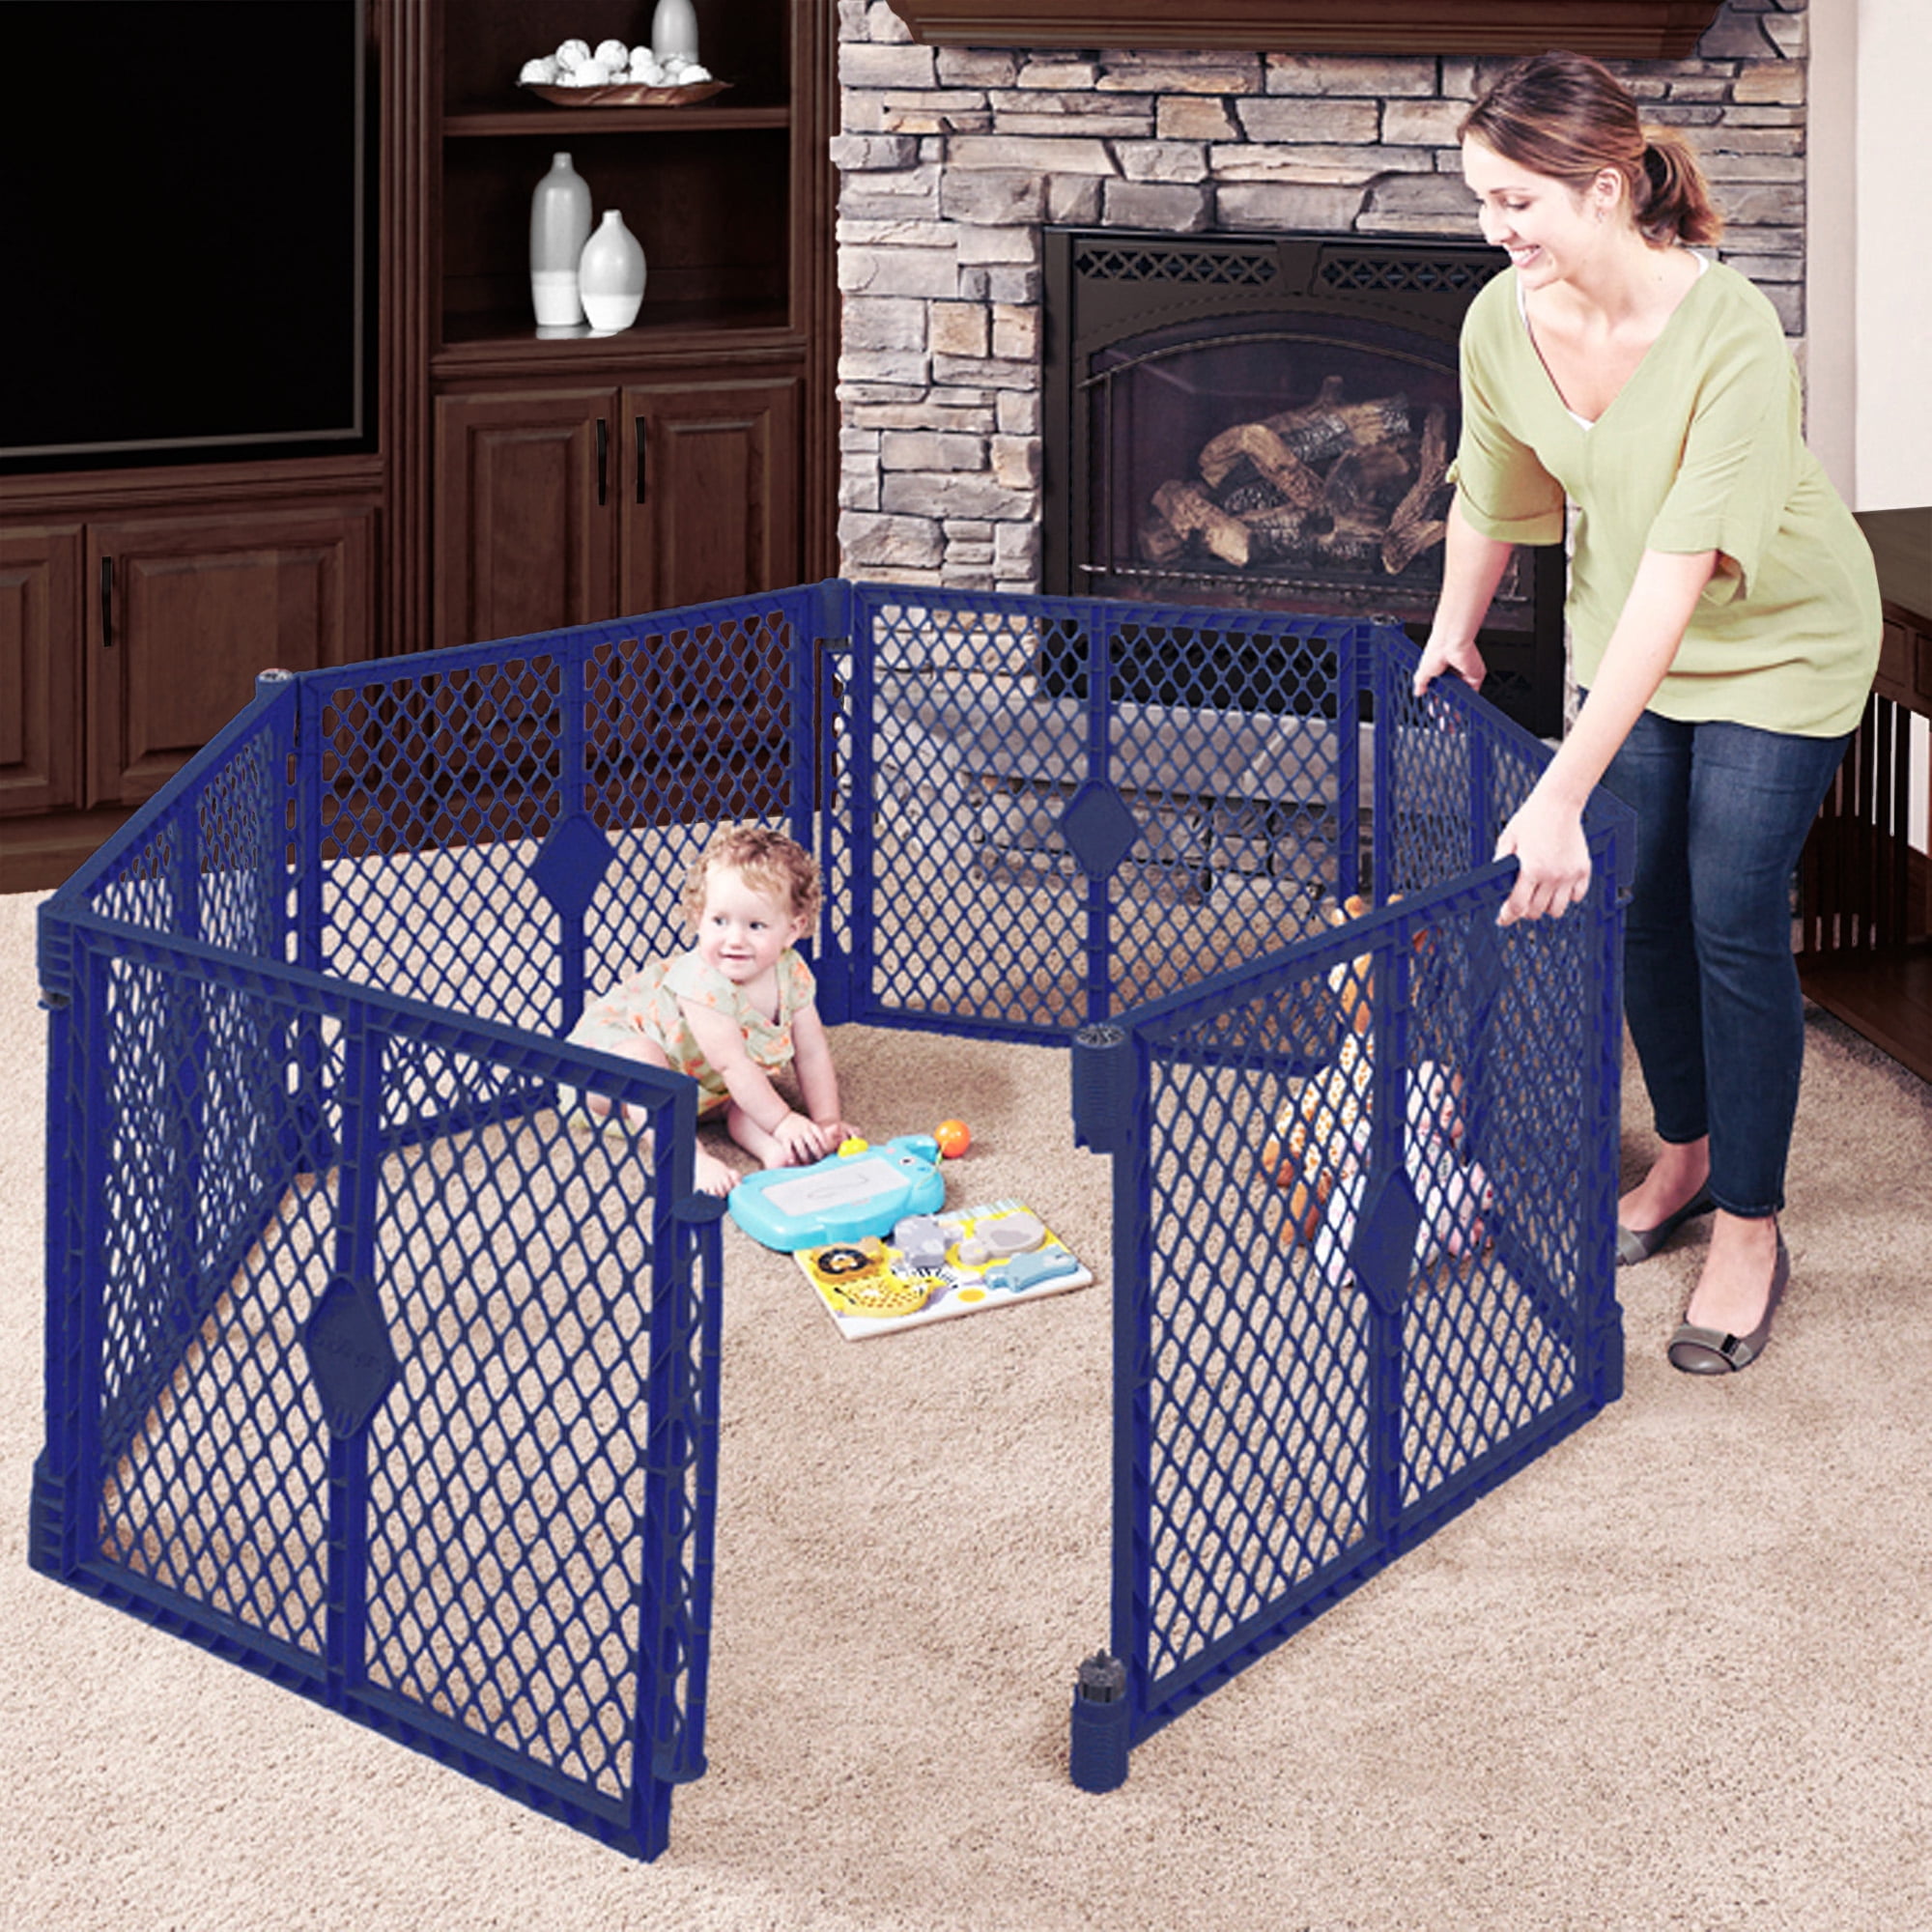 Enclosure North States 192 Superyard Indoor-Outdoor 6-Panel Play Yard: Create a Large Adjustable Play Area or Optional Barrier 26 Tall, Sand 18.5 sq ft Freestanding 